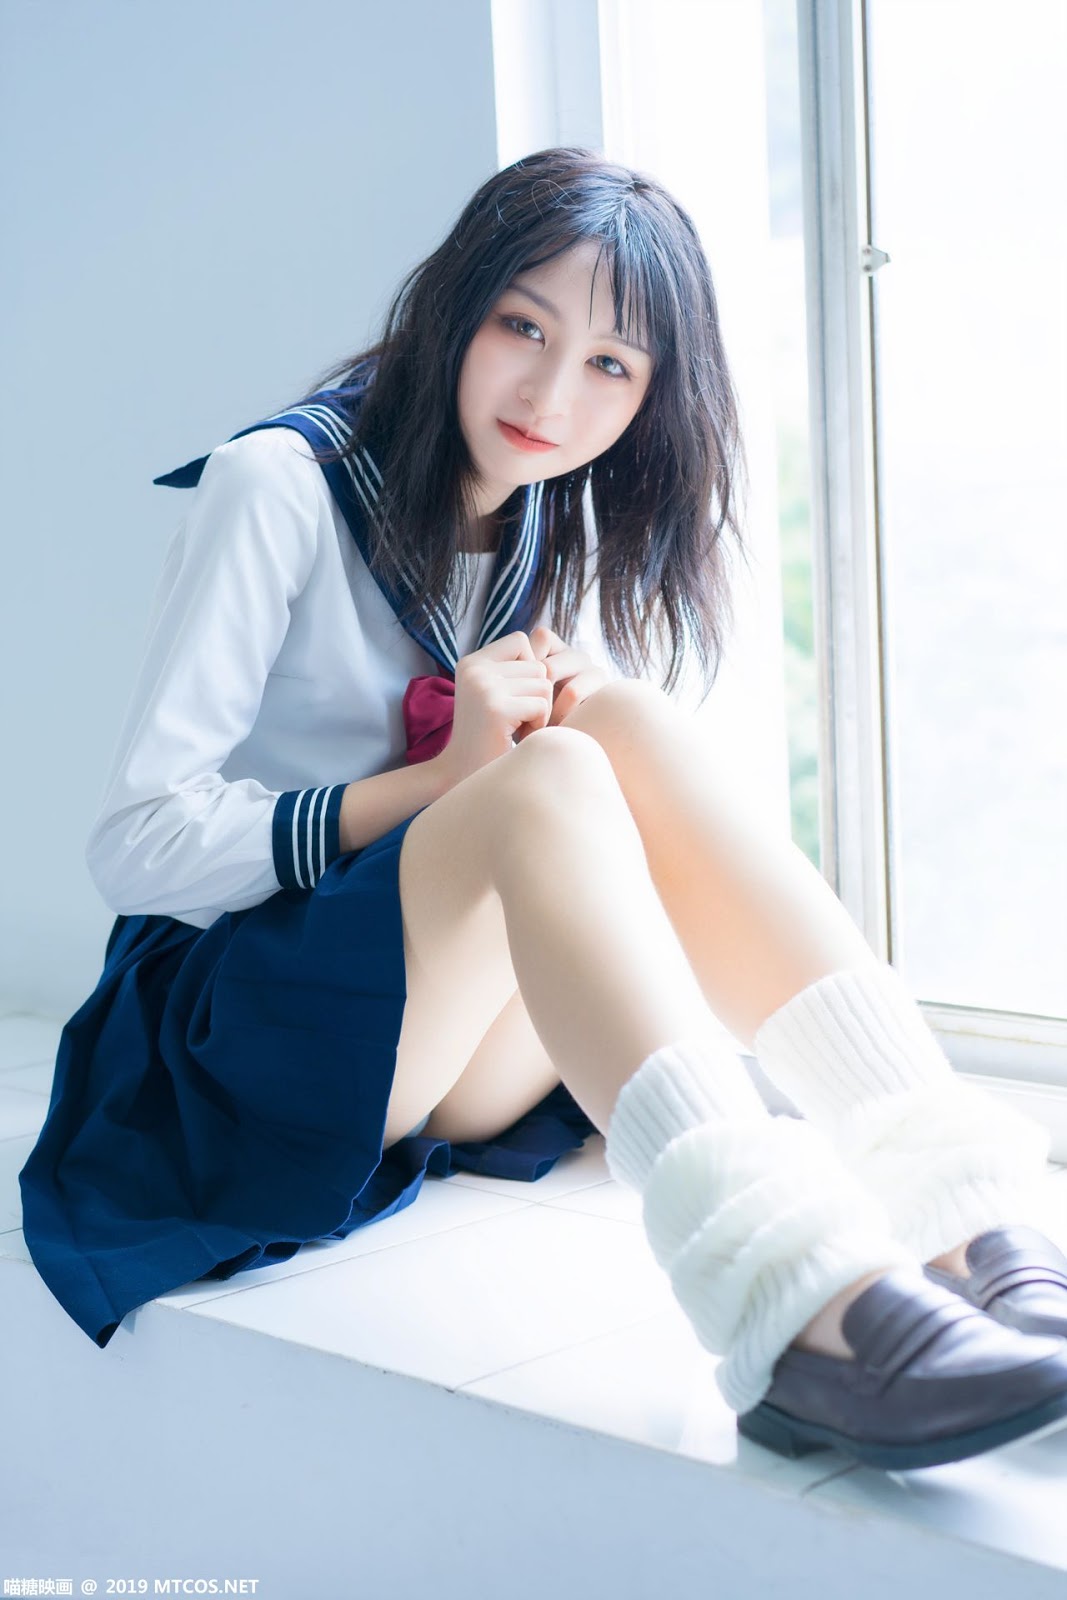 Image MTCos 喵糖映画 Vol.014 – Chinese Cute Model With Japanese School Uniform - TruePic.net- Picture-16